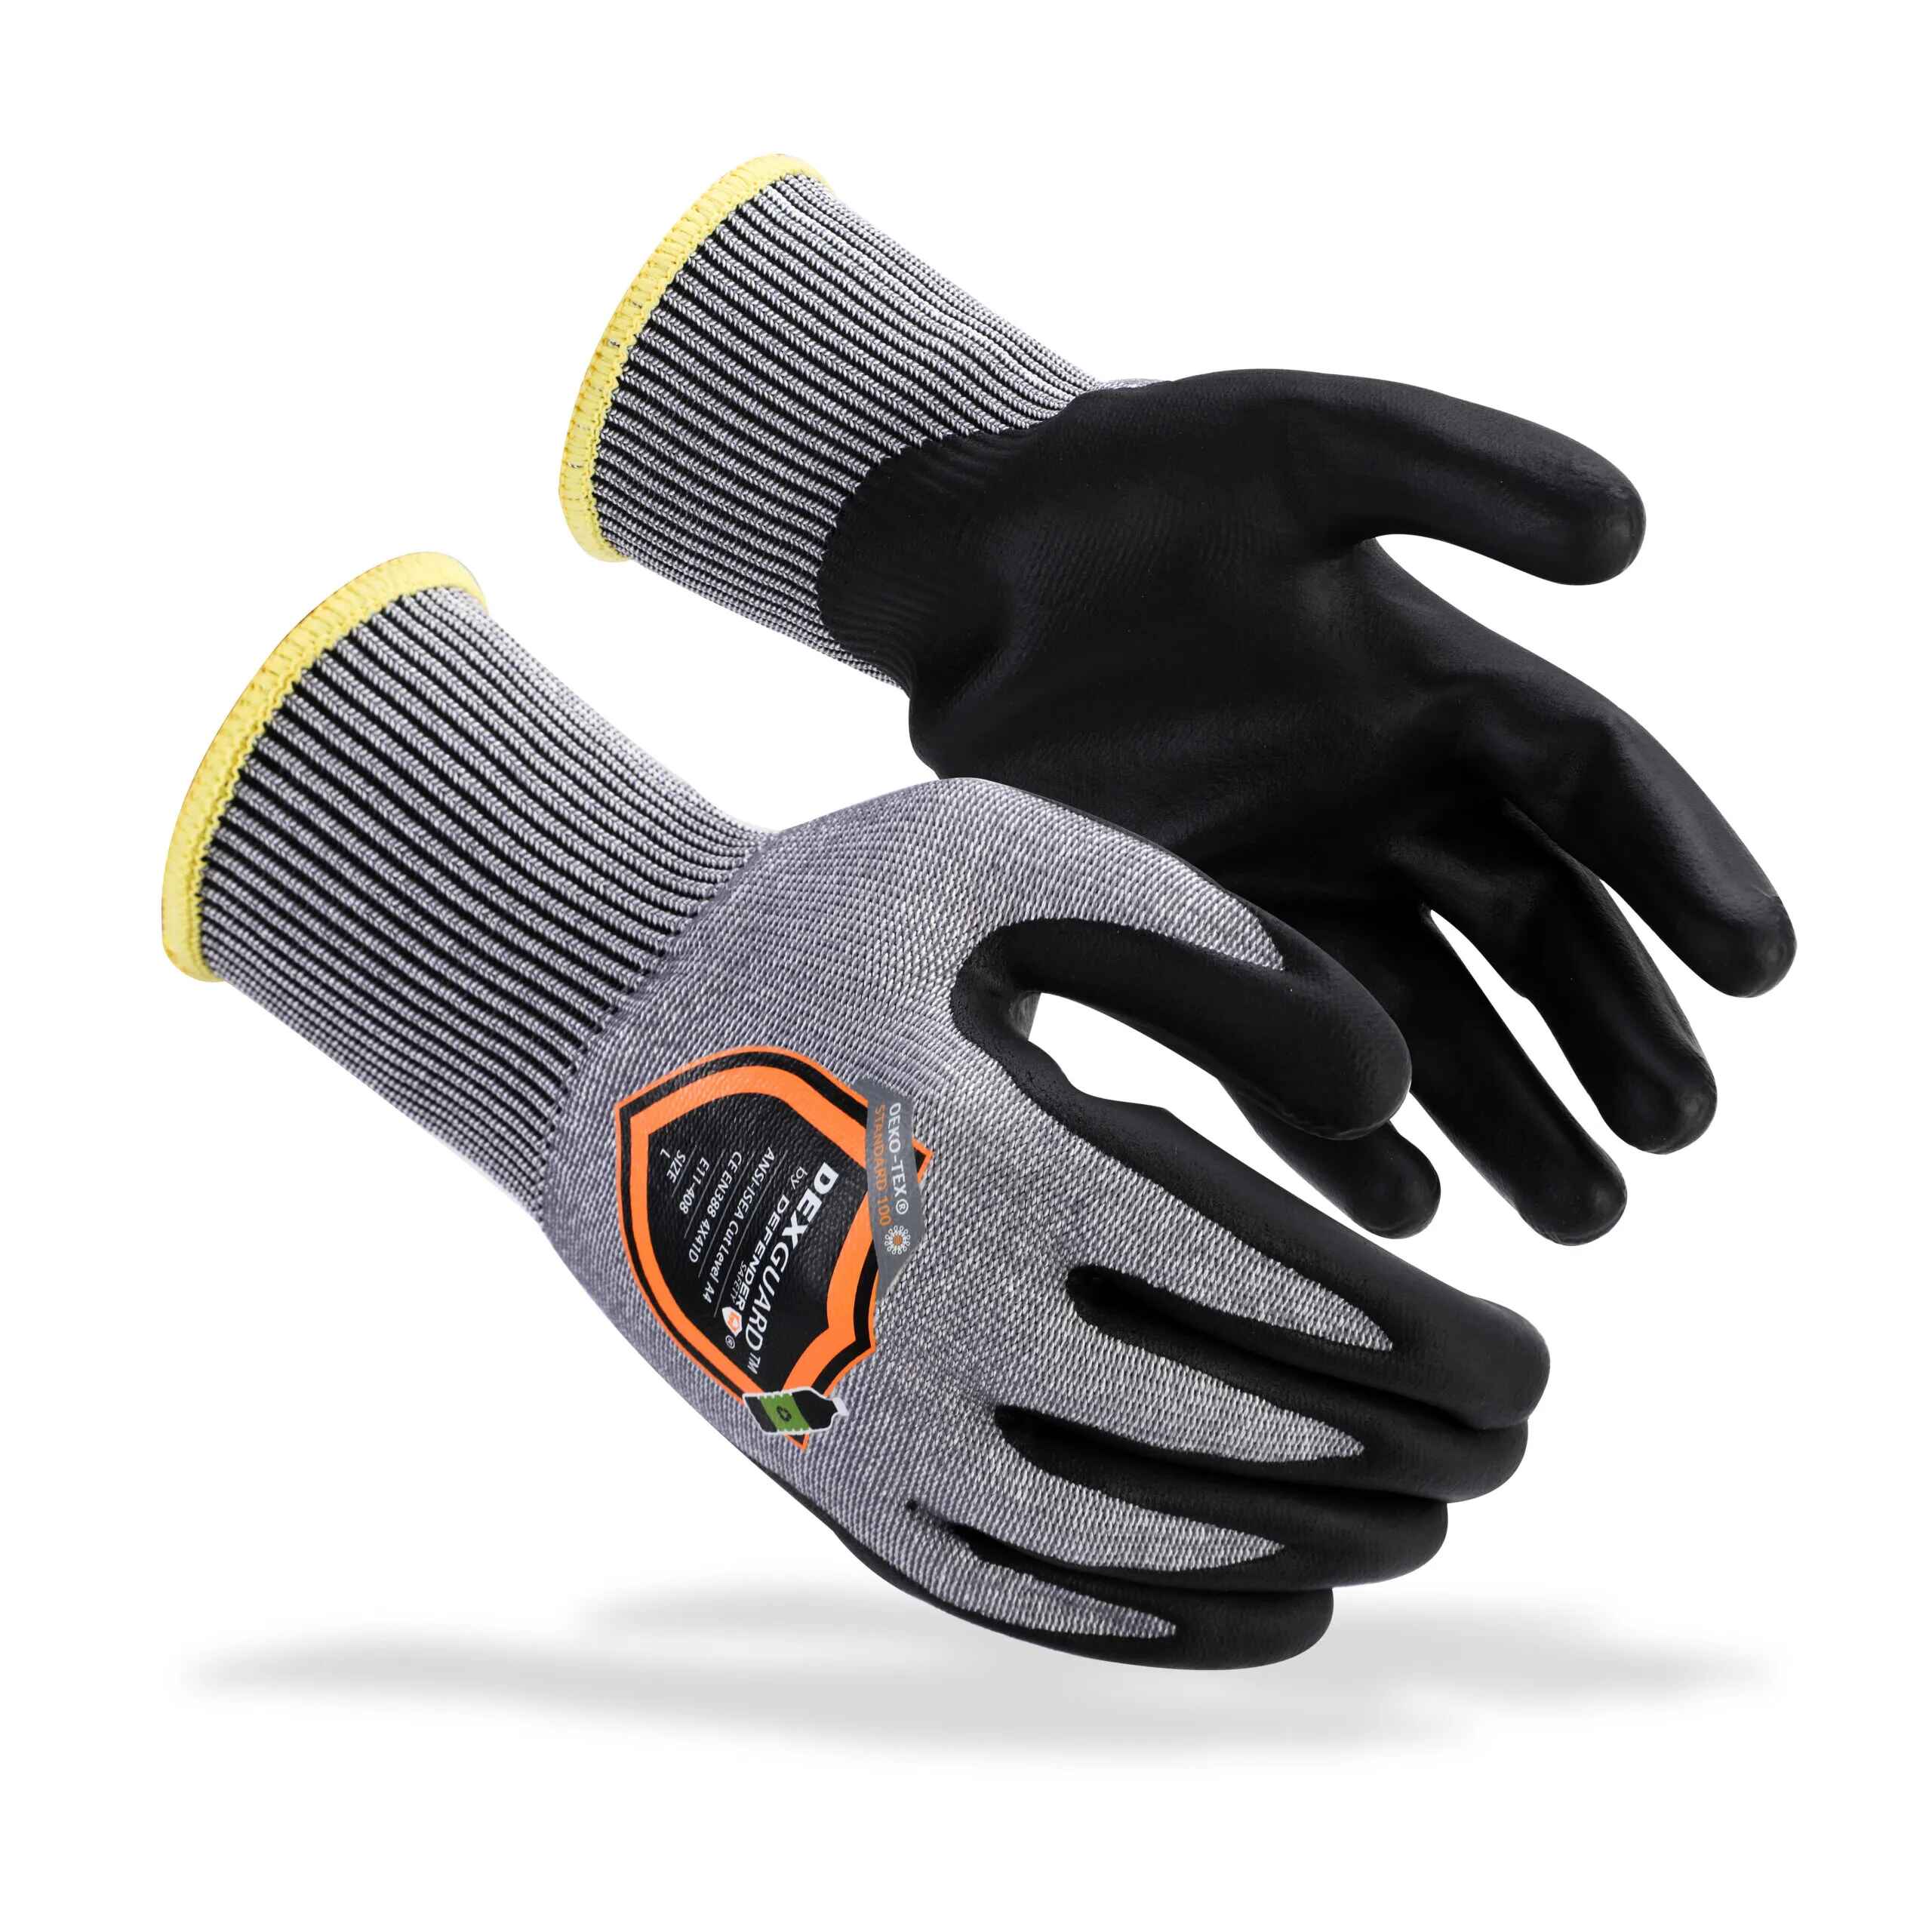 Authenticity Guaranteed A5 Cut-Resistant Work Gloves, X-Large, cut